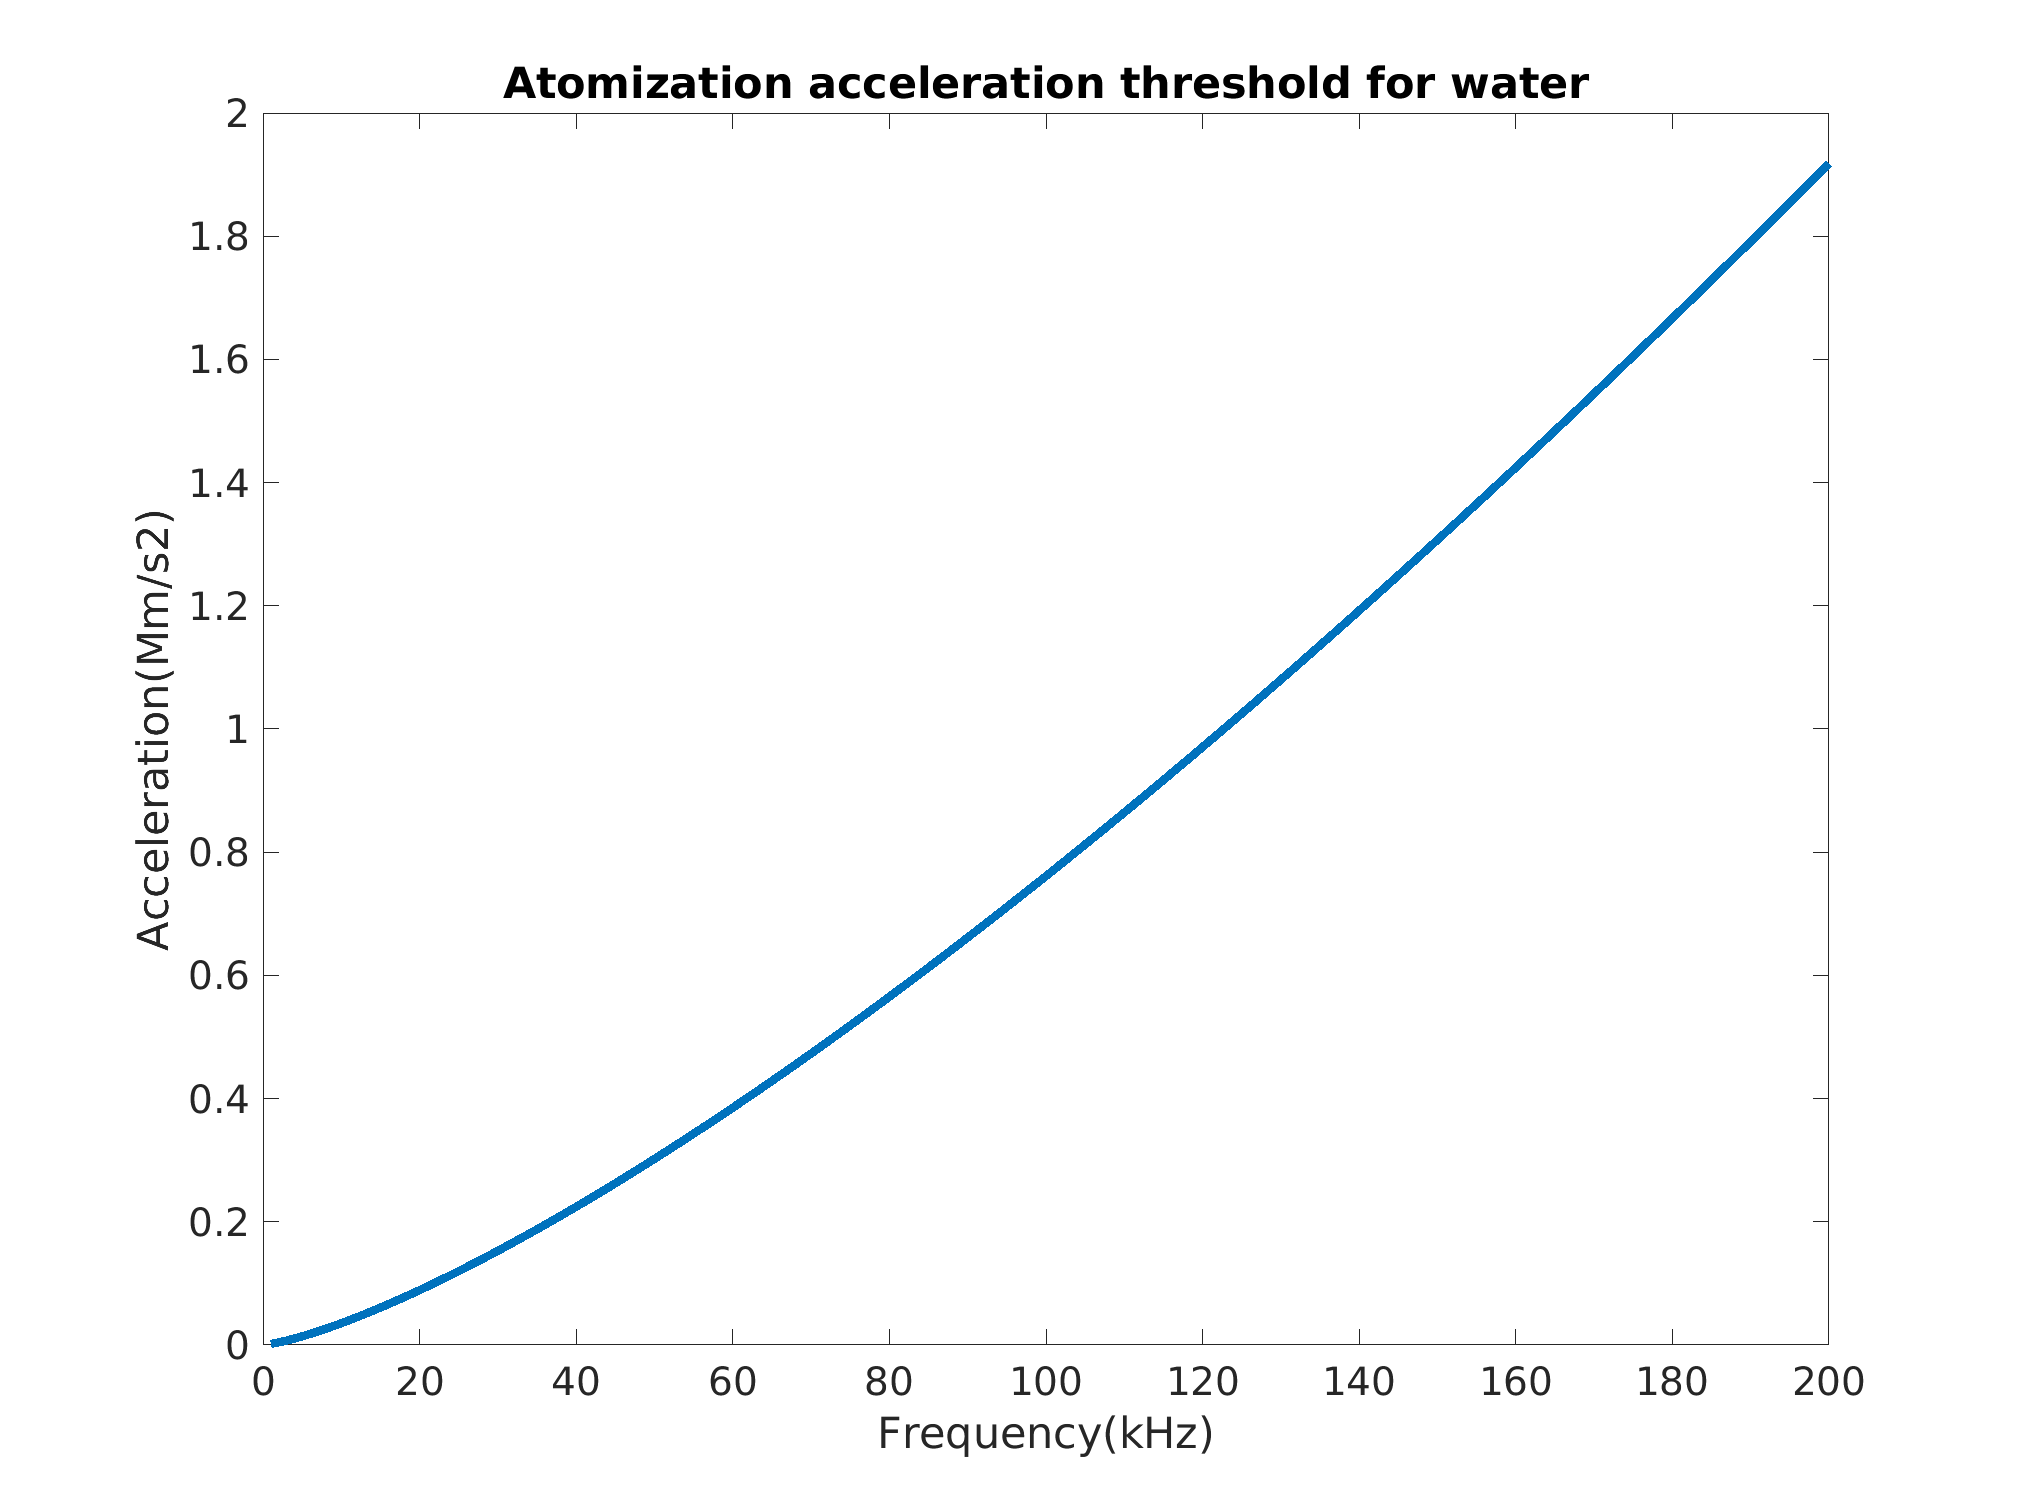  The critical acceleration to
                atomize water versus frequency